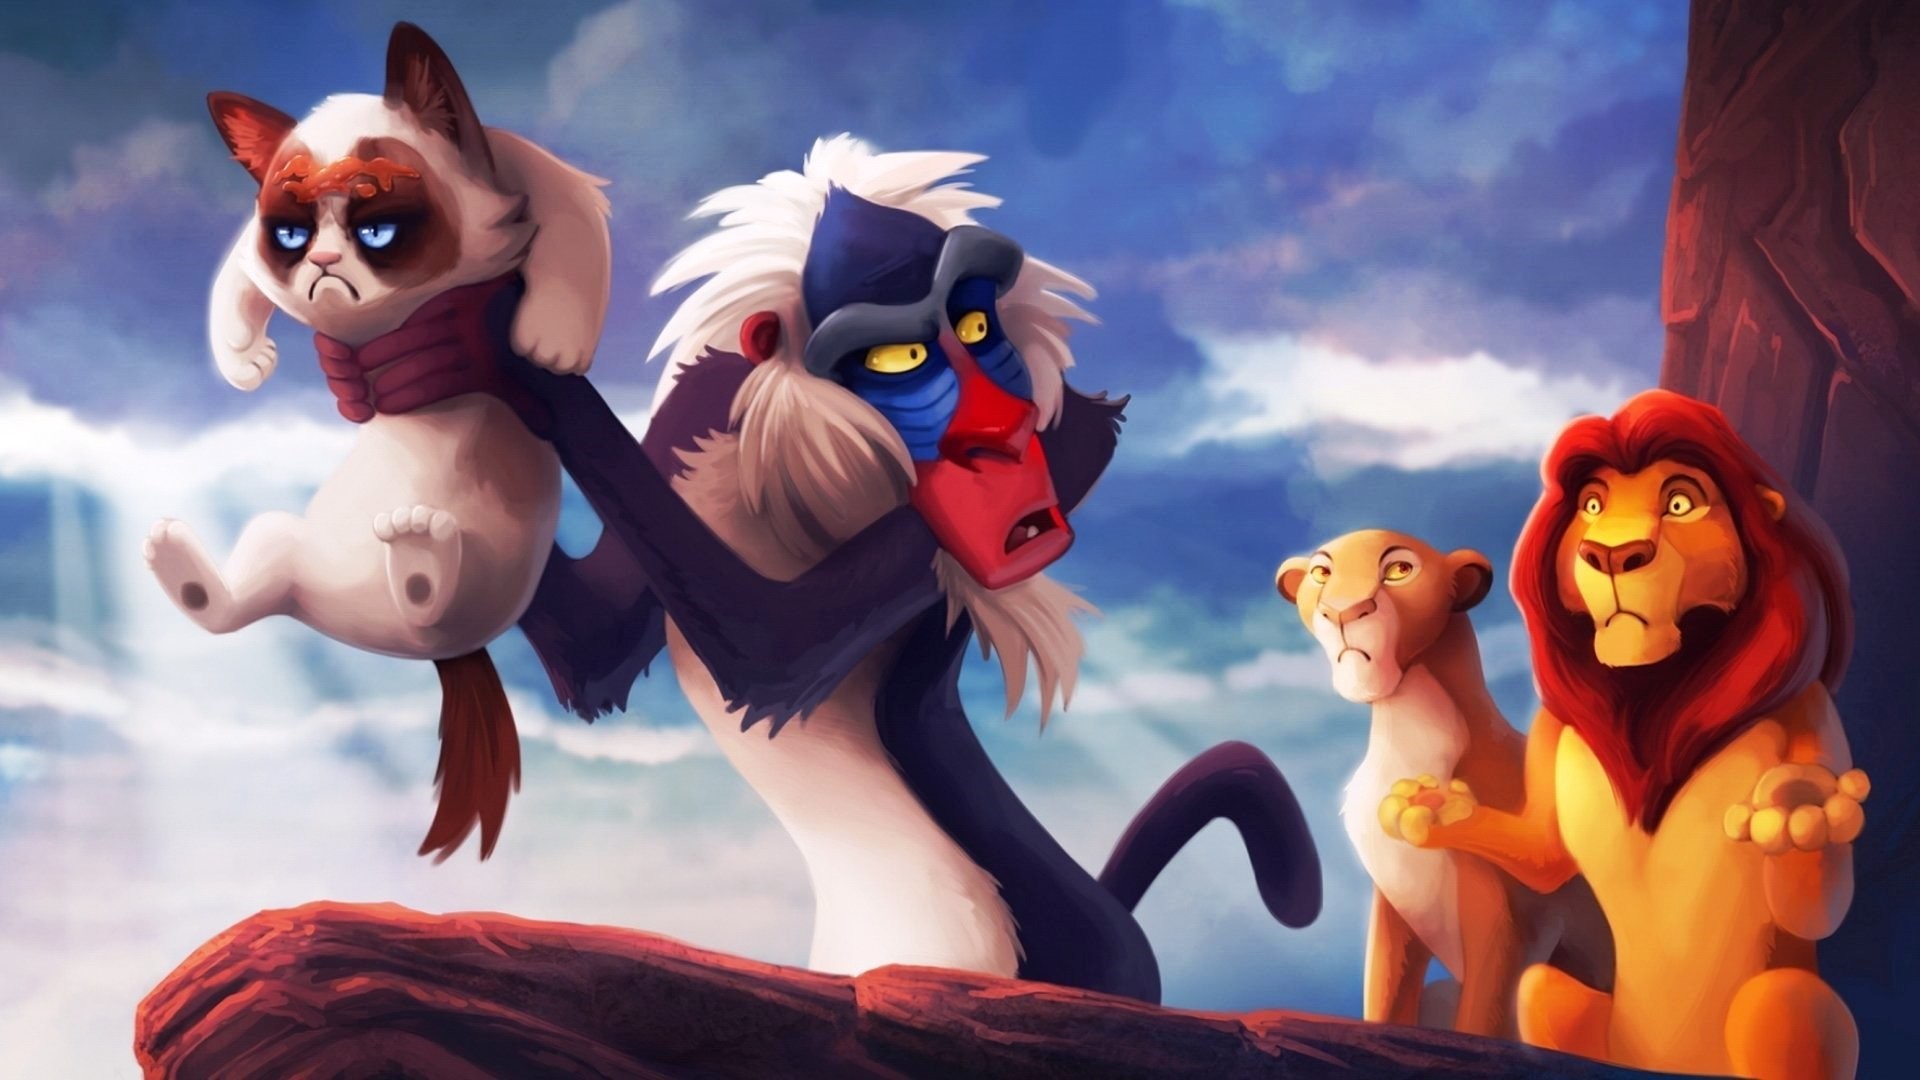 1920x1080  the lion king cartoons monkey wallpaper disney lion king computer wallpapers  wallpaper uk hd for iphone border bedrooms android tumblr ipad